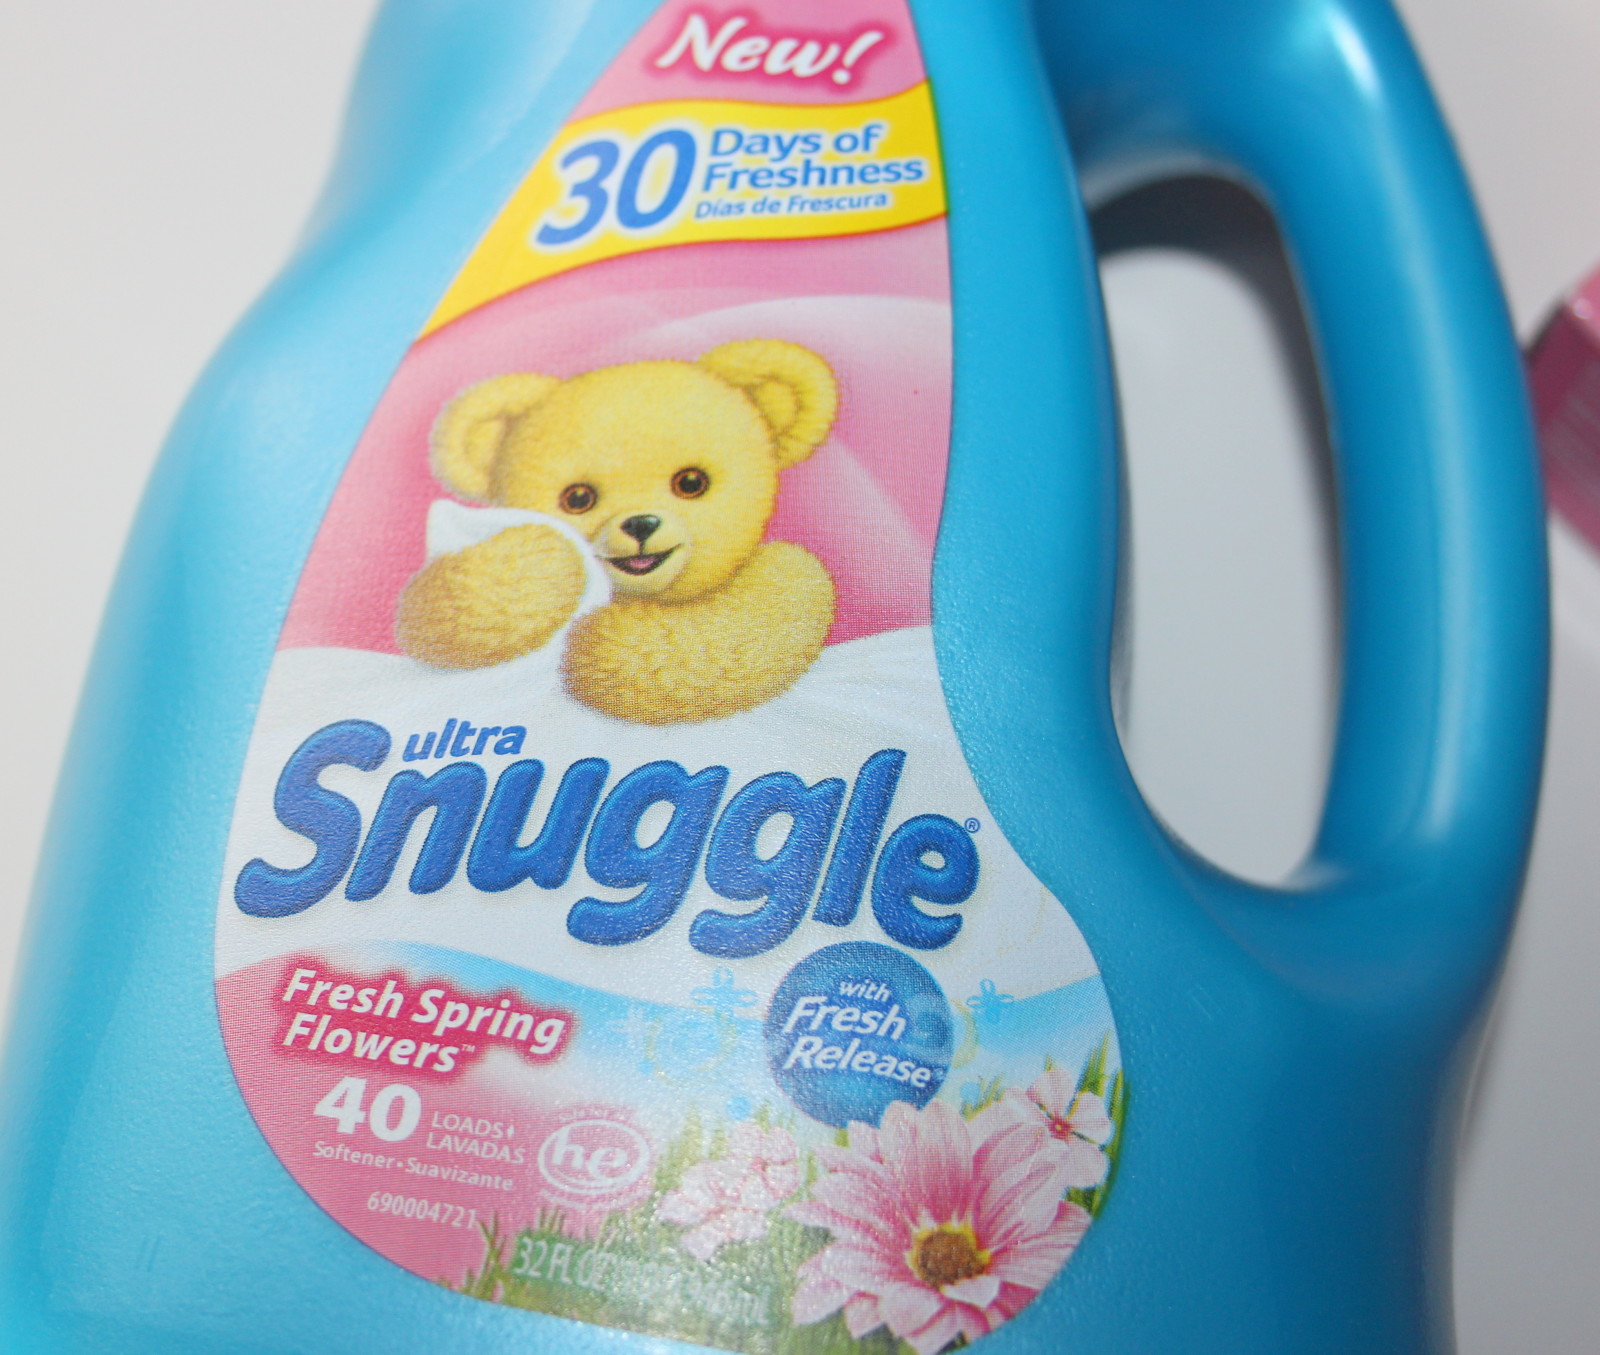 Review Snuggle Fresh Spring Flowers Fabric Softener